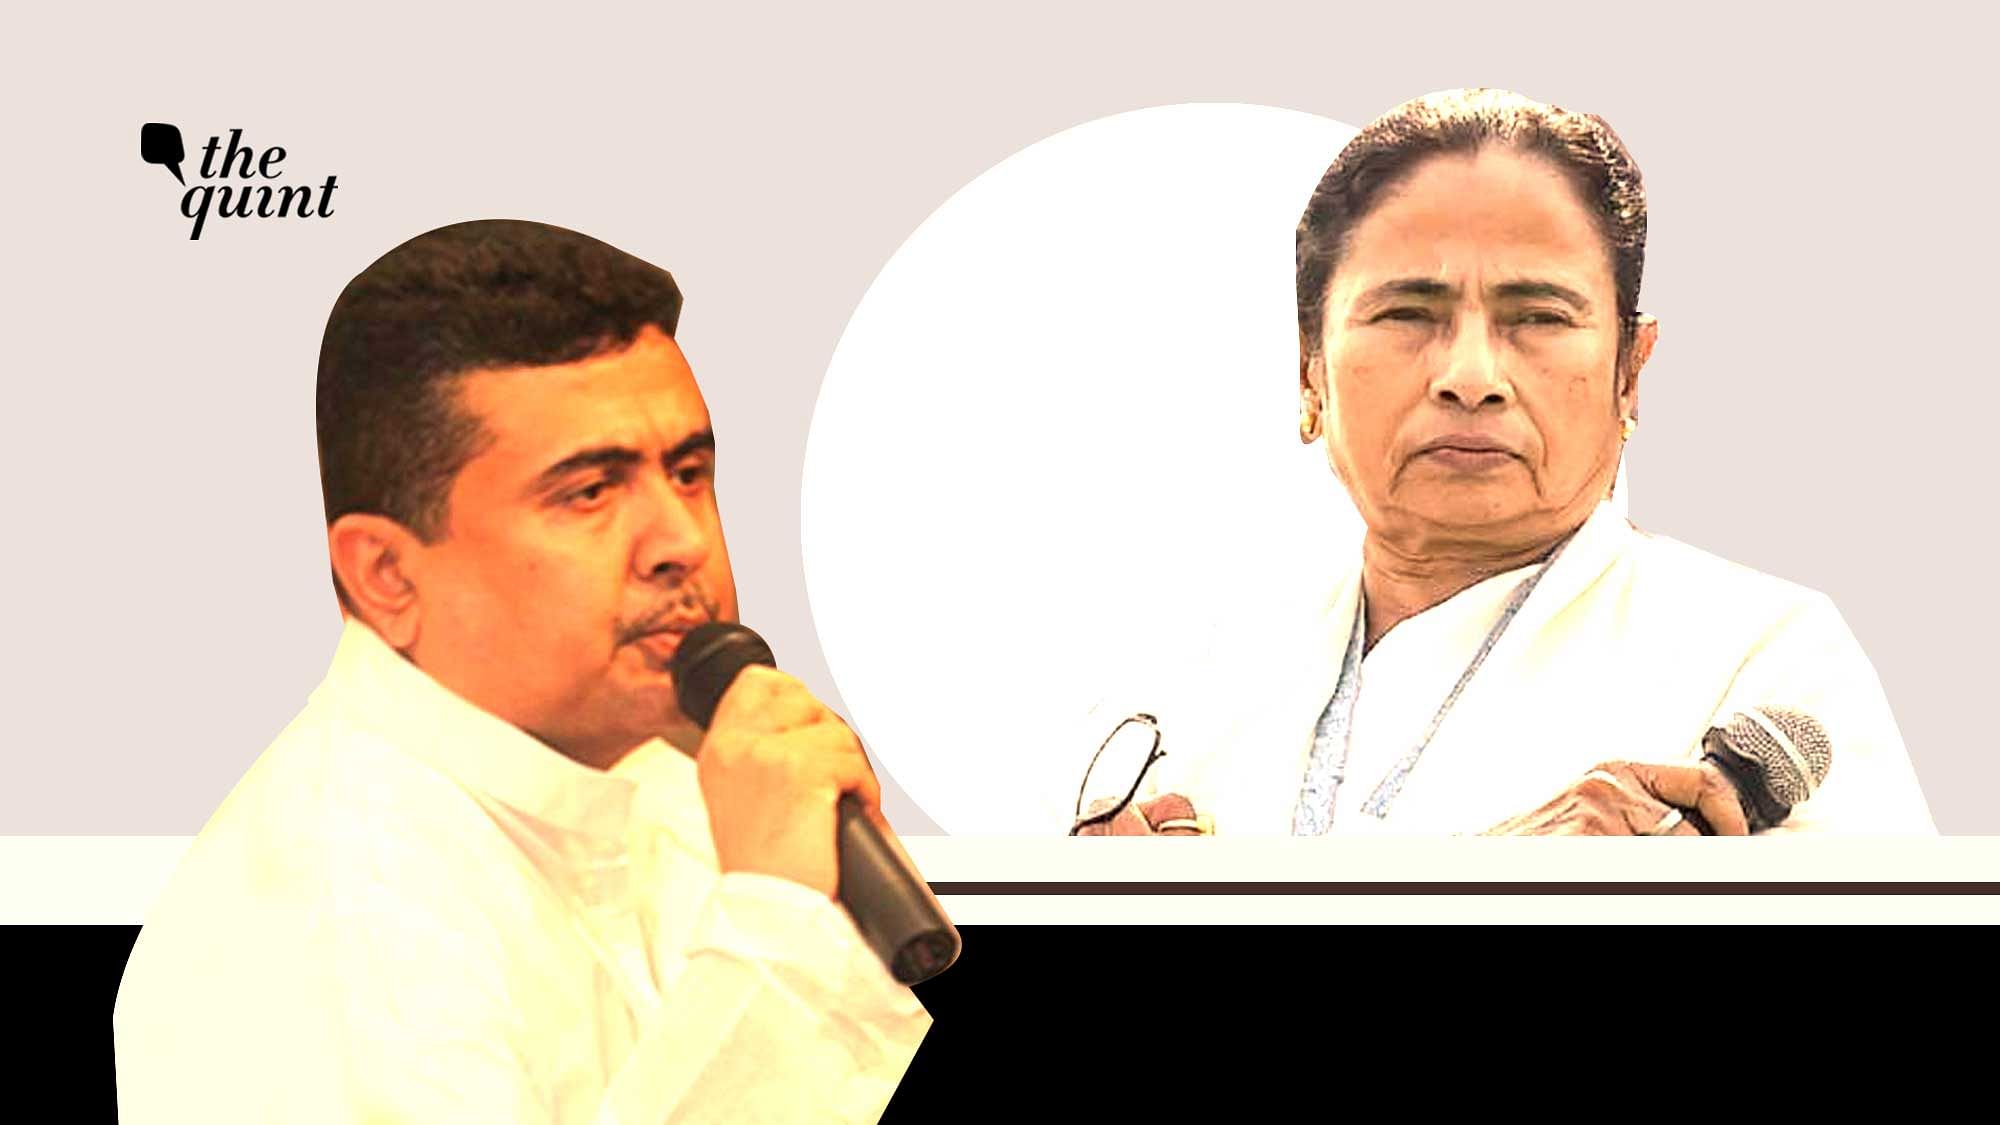 Banerjee’s Trinamool Congress (TMC) on Wednesday appealed to the Election Commission in a bid to cancel Suvendu Adhikari’s nomination from Nandigram.